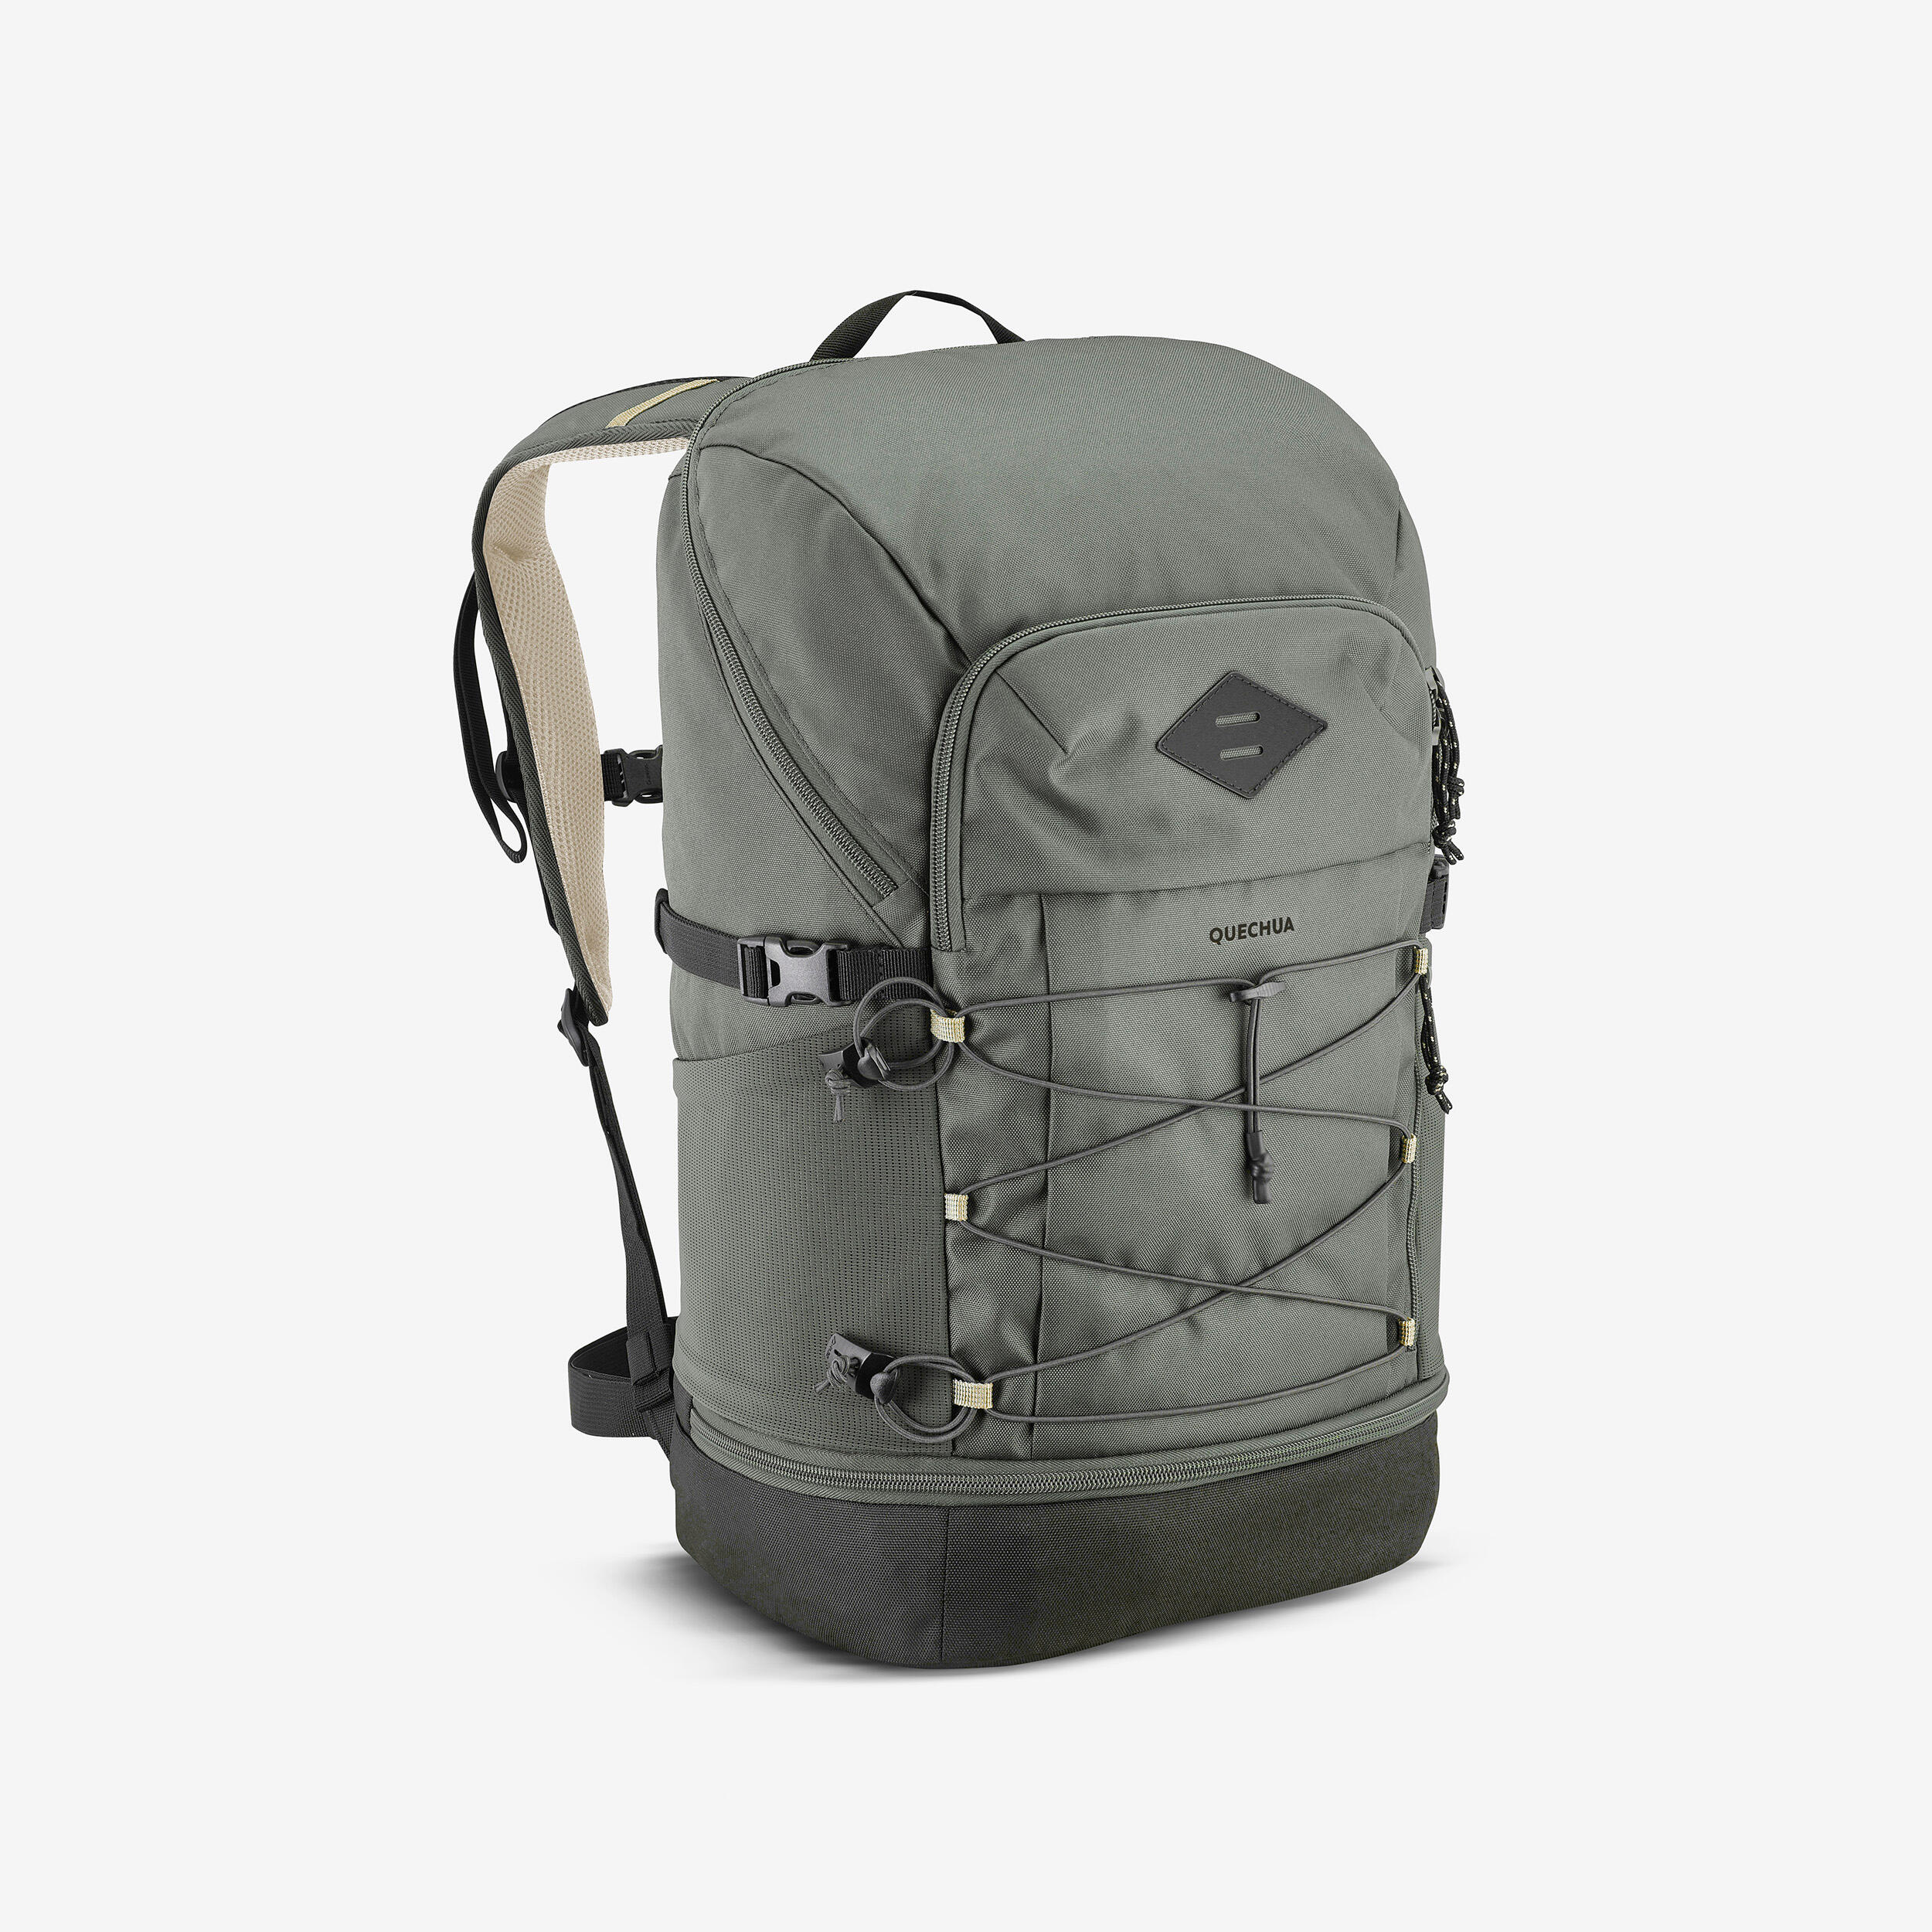 QUECHUA Hiking backpack 30L - NH Arpenaz 500